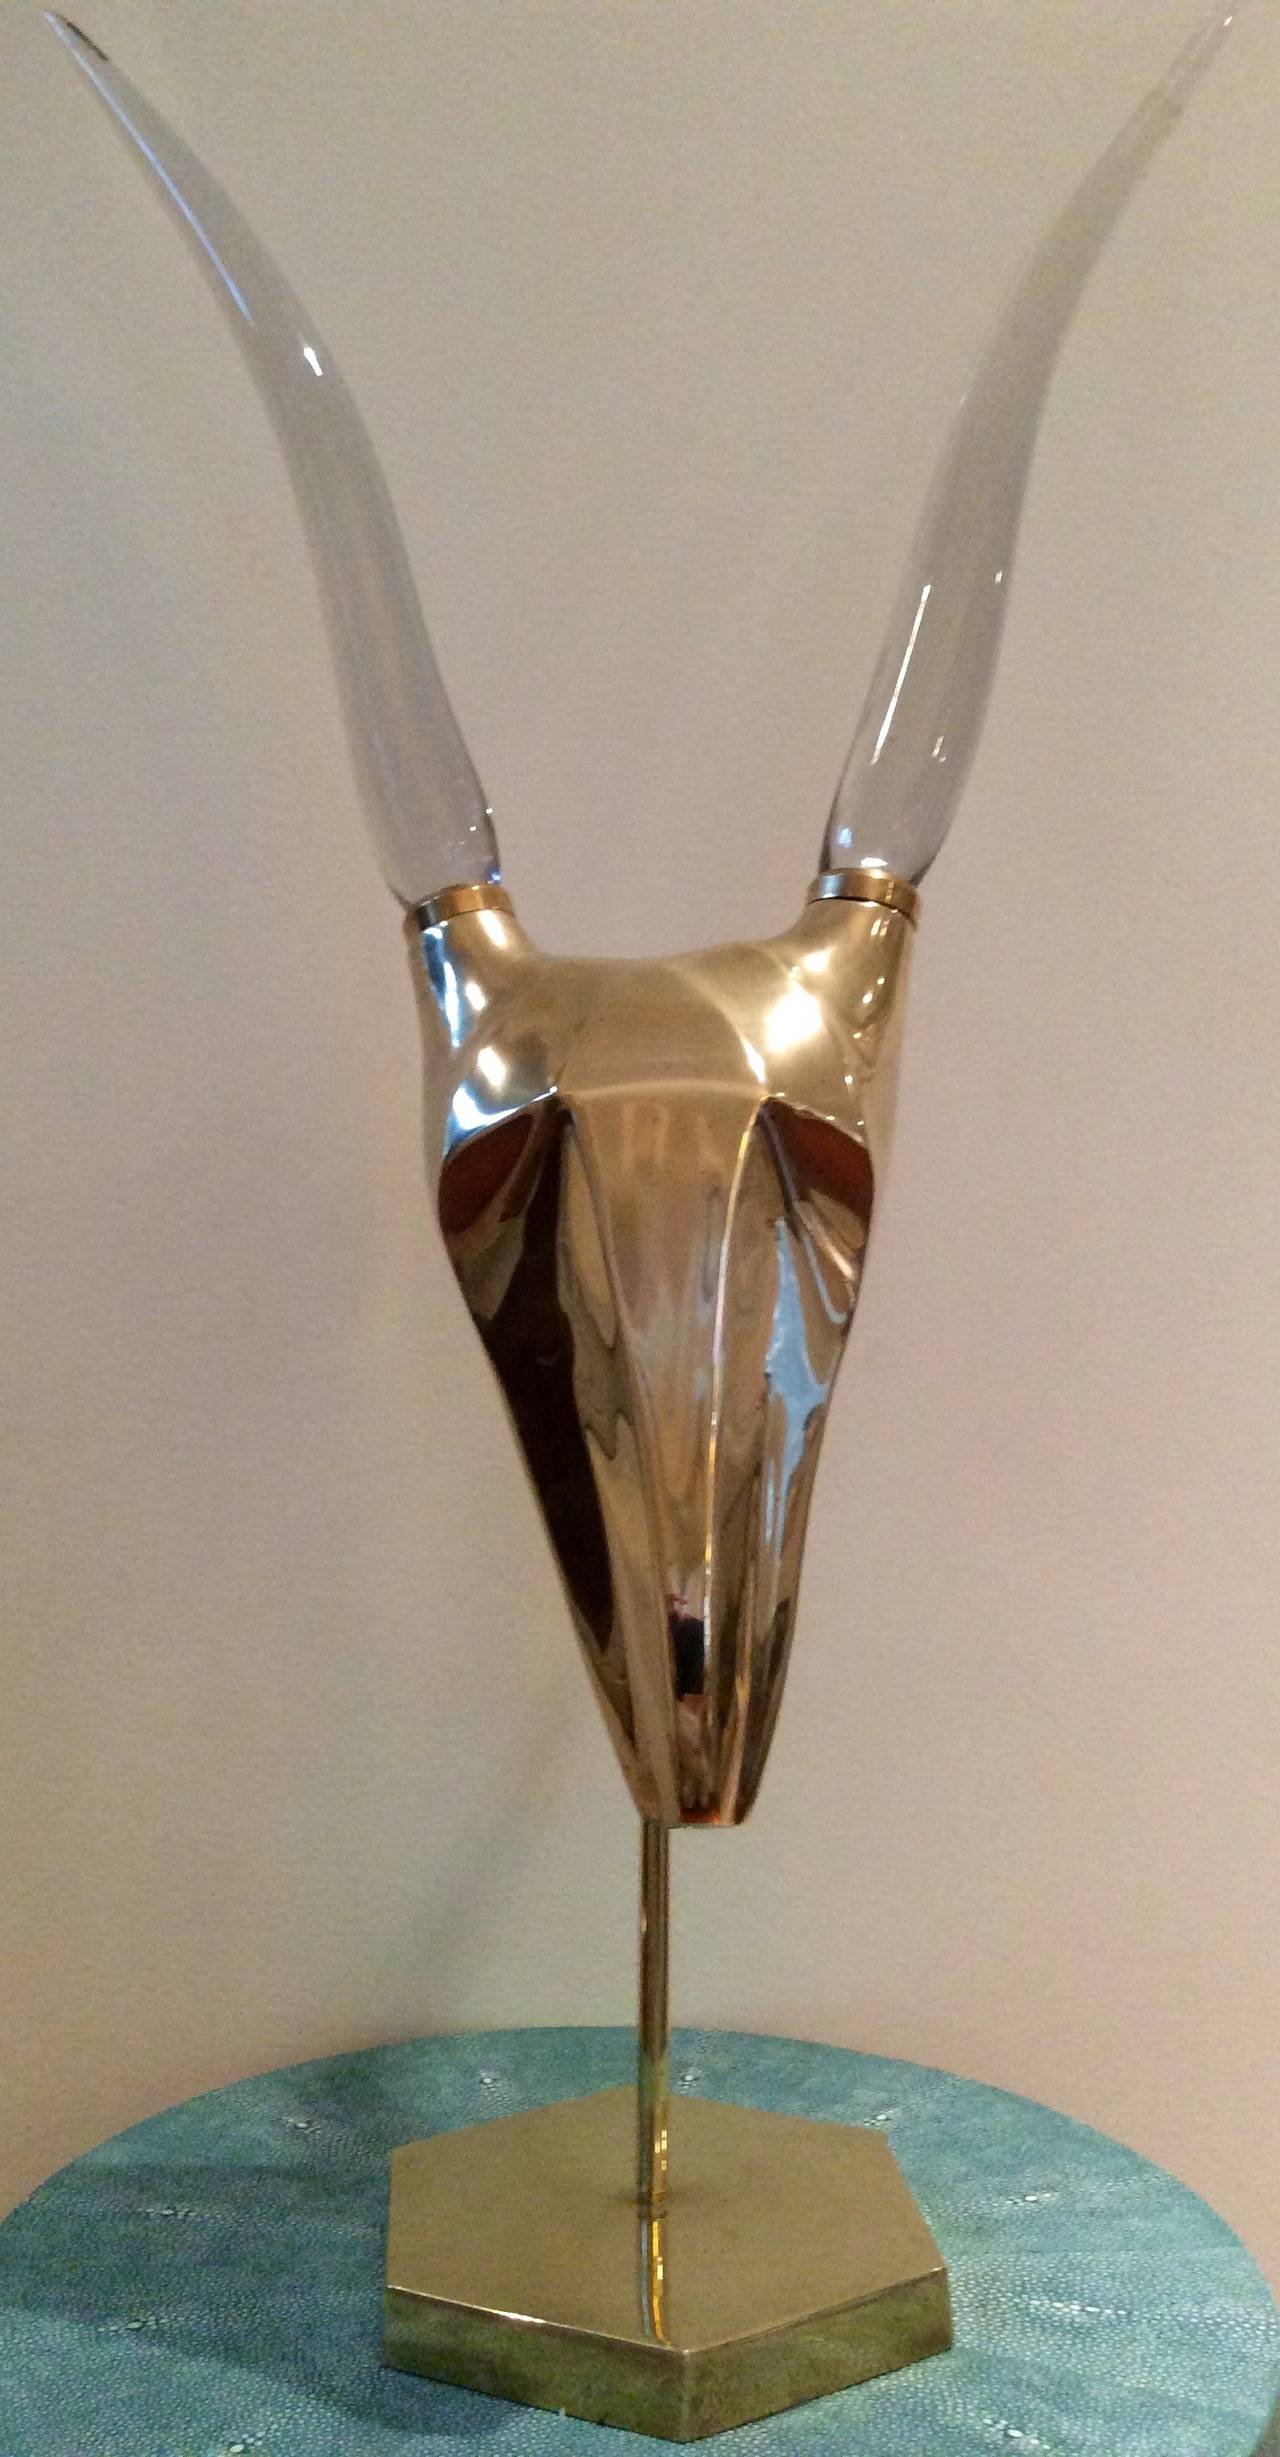 Beautifully polished, sculptural antelope head fitted with sinuous glass horns on a Sexton brass base. Strong statement piece in amazing vintage condition.